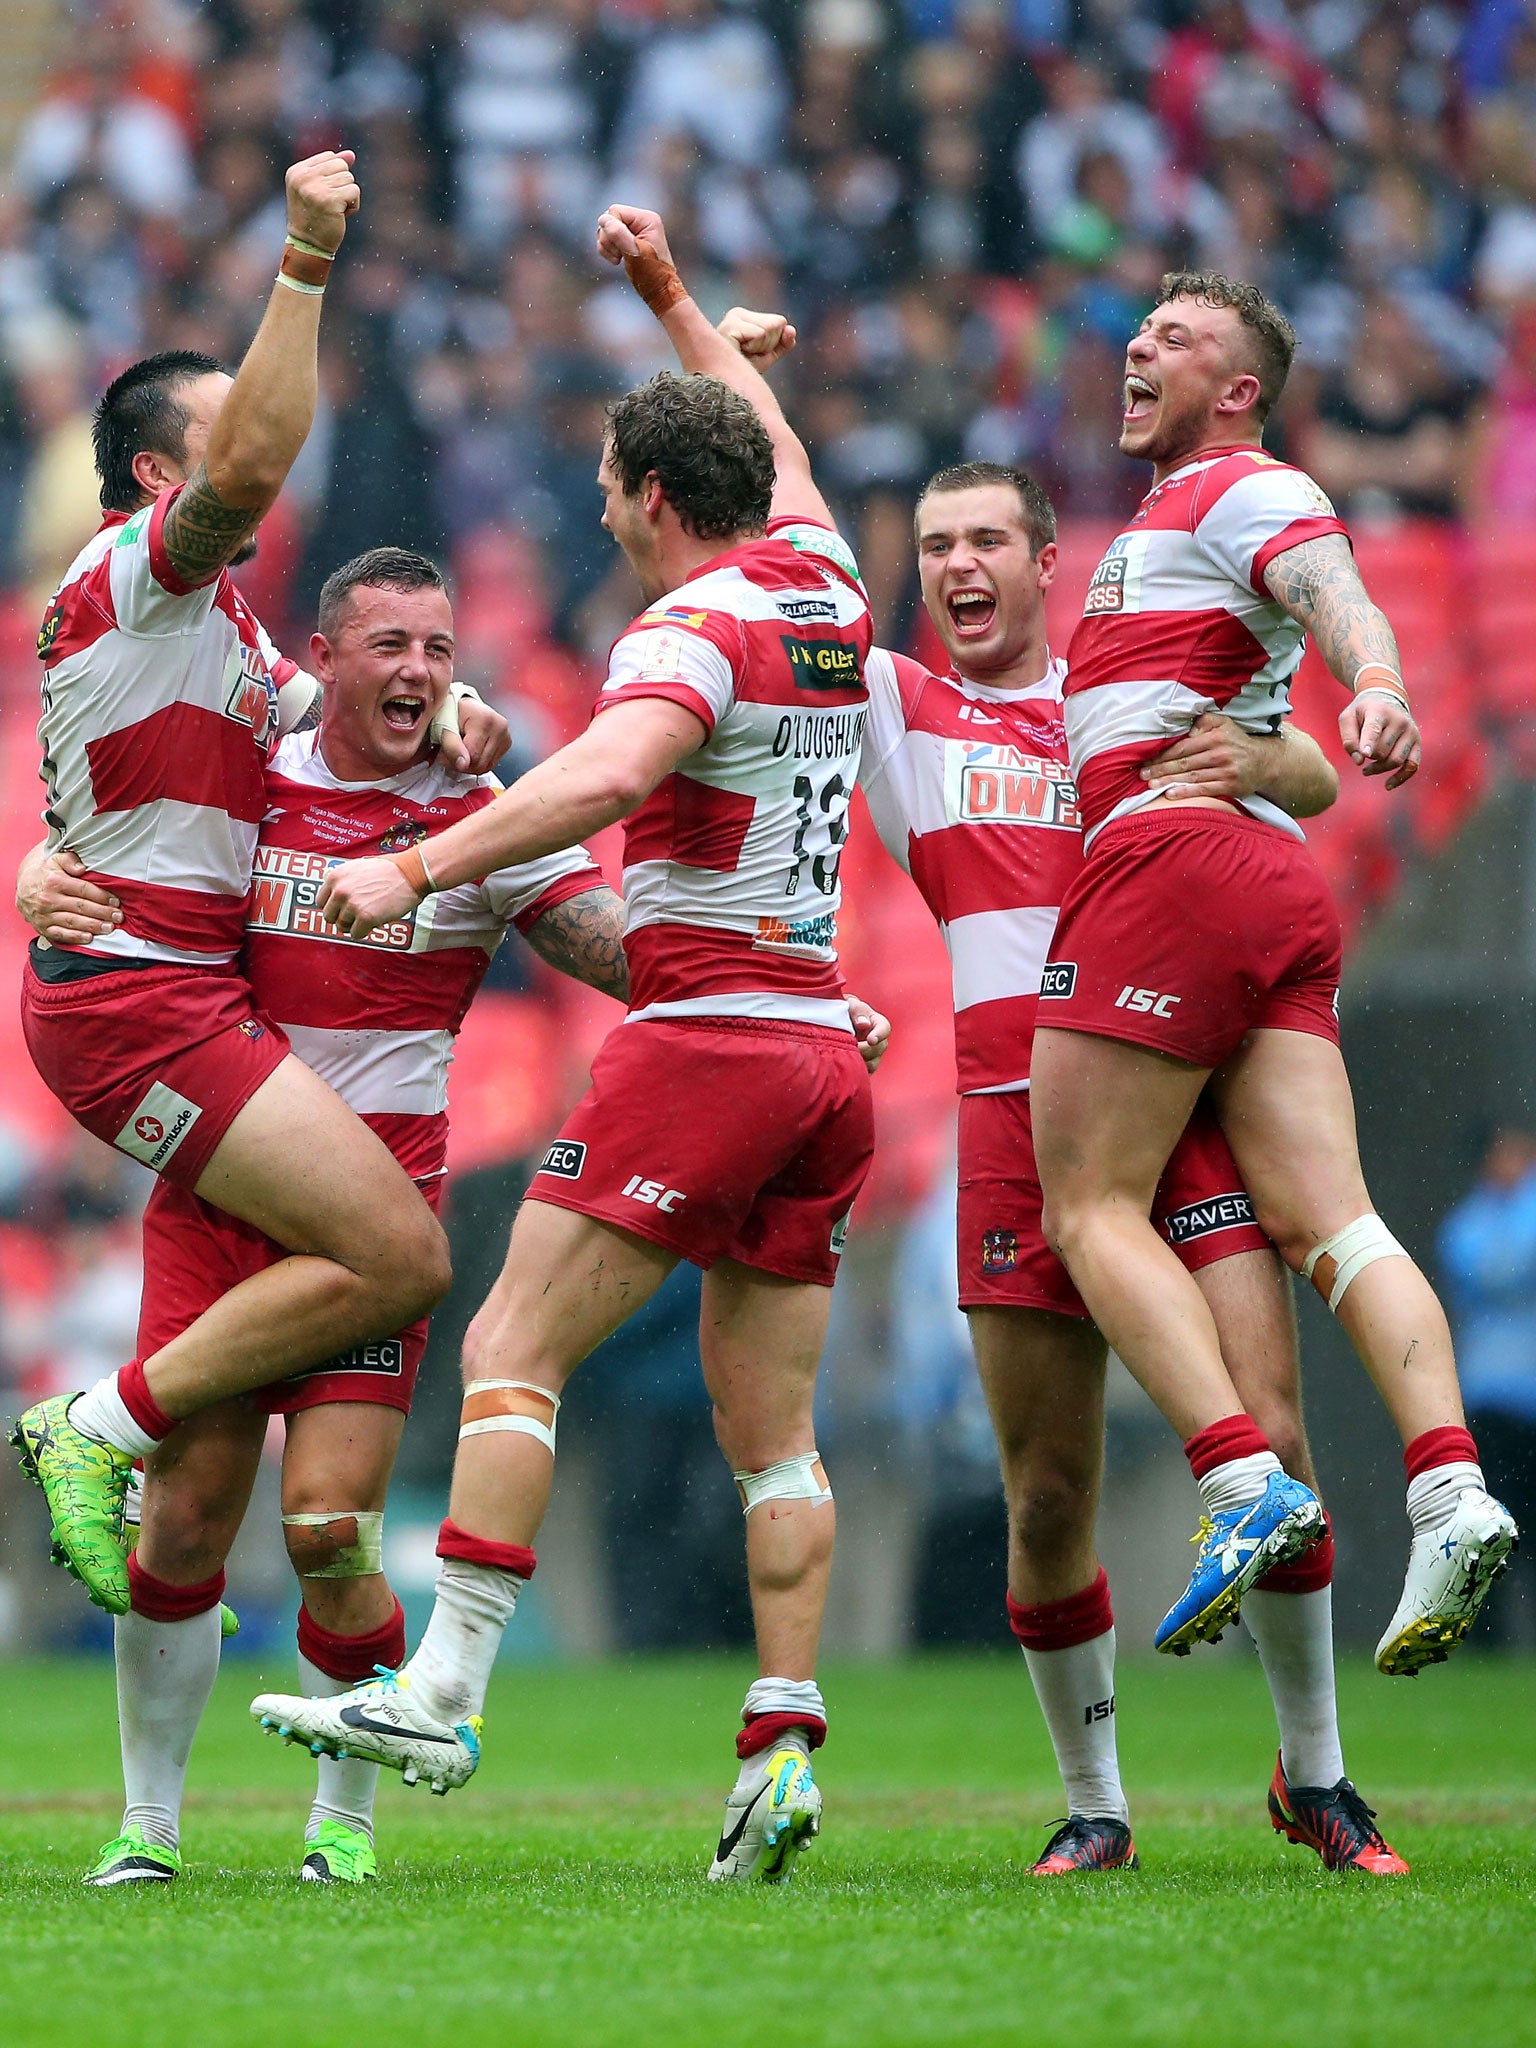 Jig of joy: Wigan players celebrate as the final whistle confirms victory